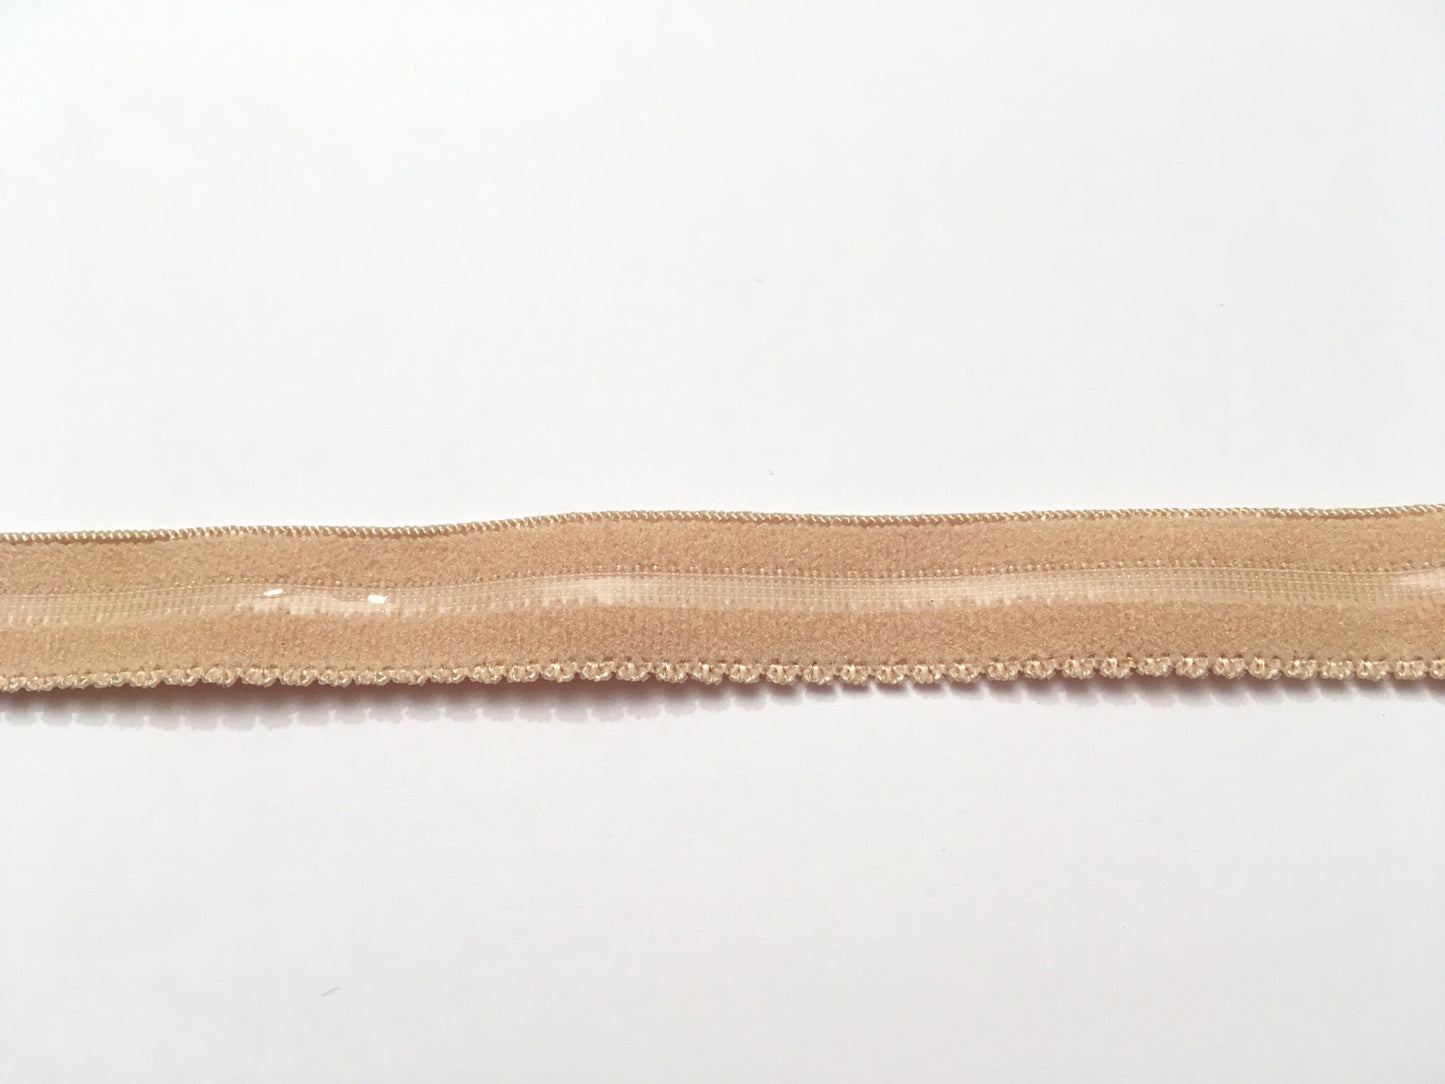  Blonde Elastic with Silicone Strip - 12mm